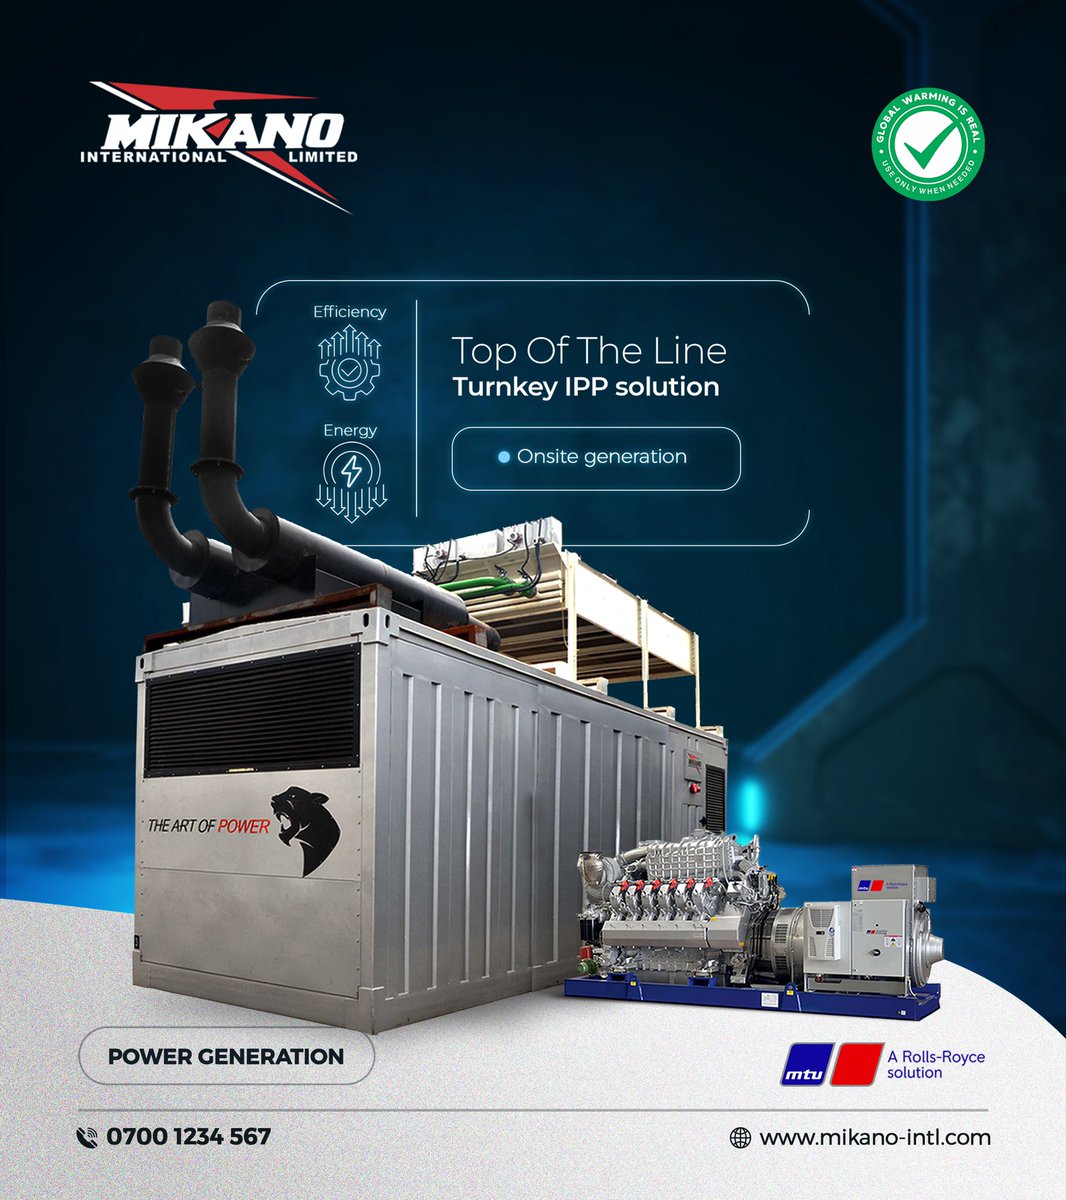 Increase your factory's operational output with Mikano's Turnkey IPP solution utilising engines from the global brand, MTU.

Send us a DM or call 07001234567 to make a purchase. 

#ReliableEnergy #UninterruptedPowerSupply #PowerProjects #Mikano #MikanoIPP #IPP #IPPSolutions